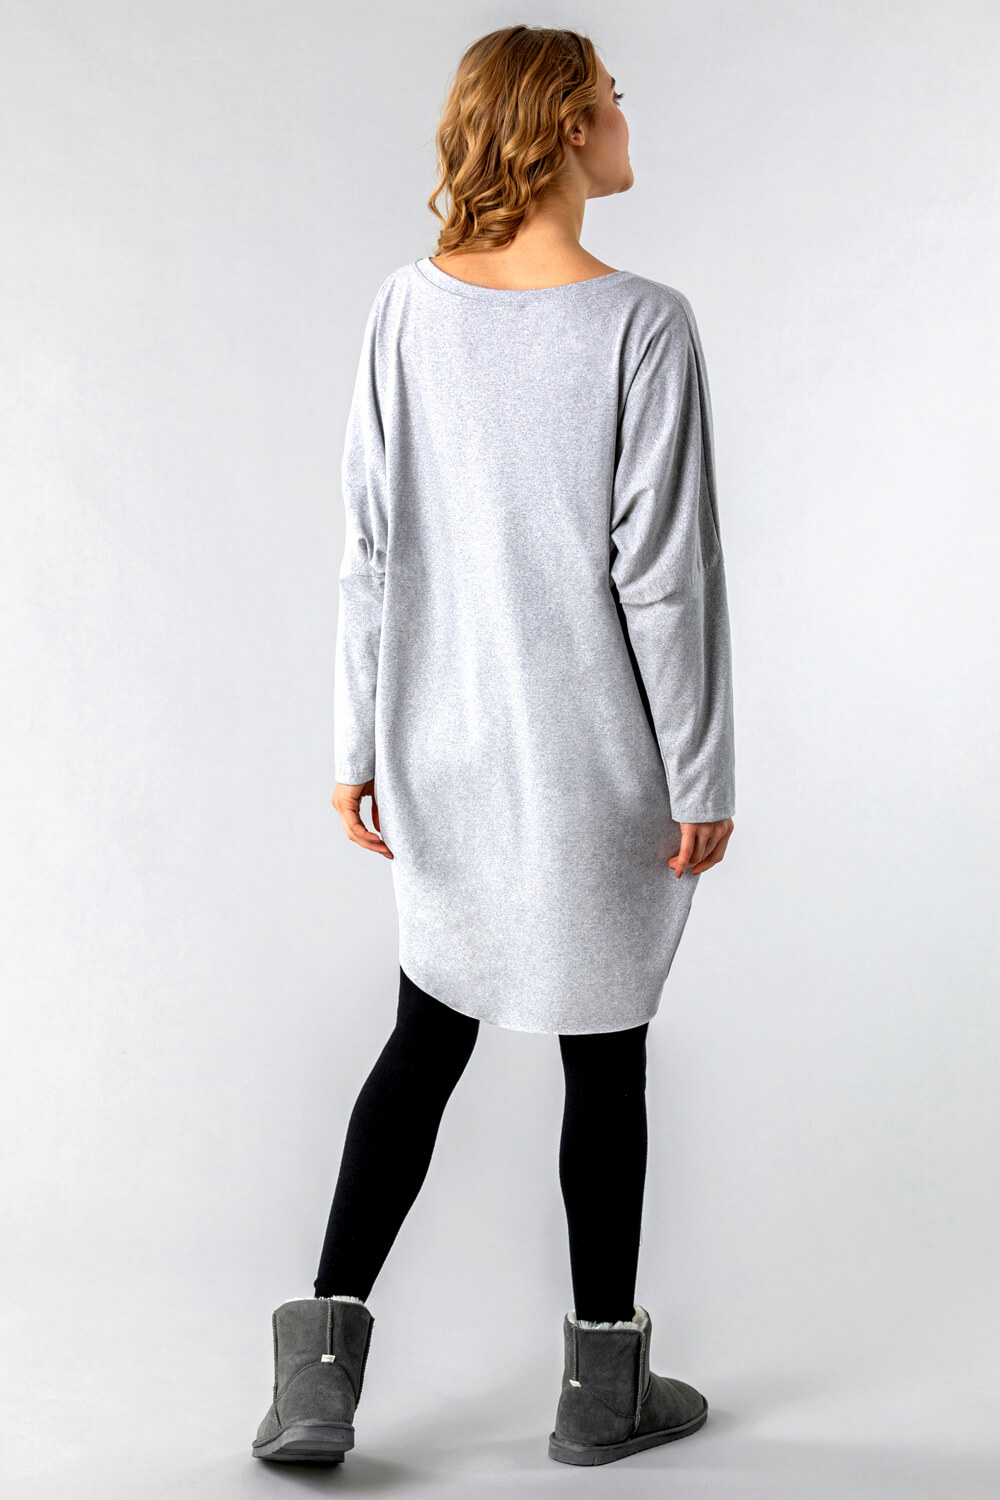 Light Grey One Size Foil Heart Print Lounge Top, Image 3 of 4